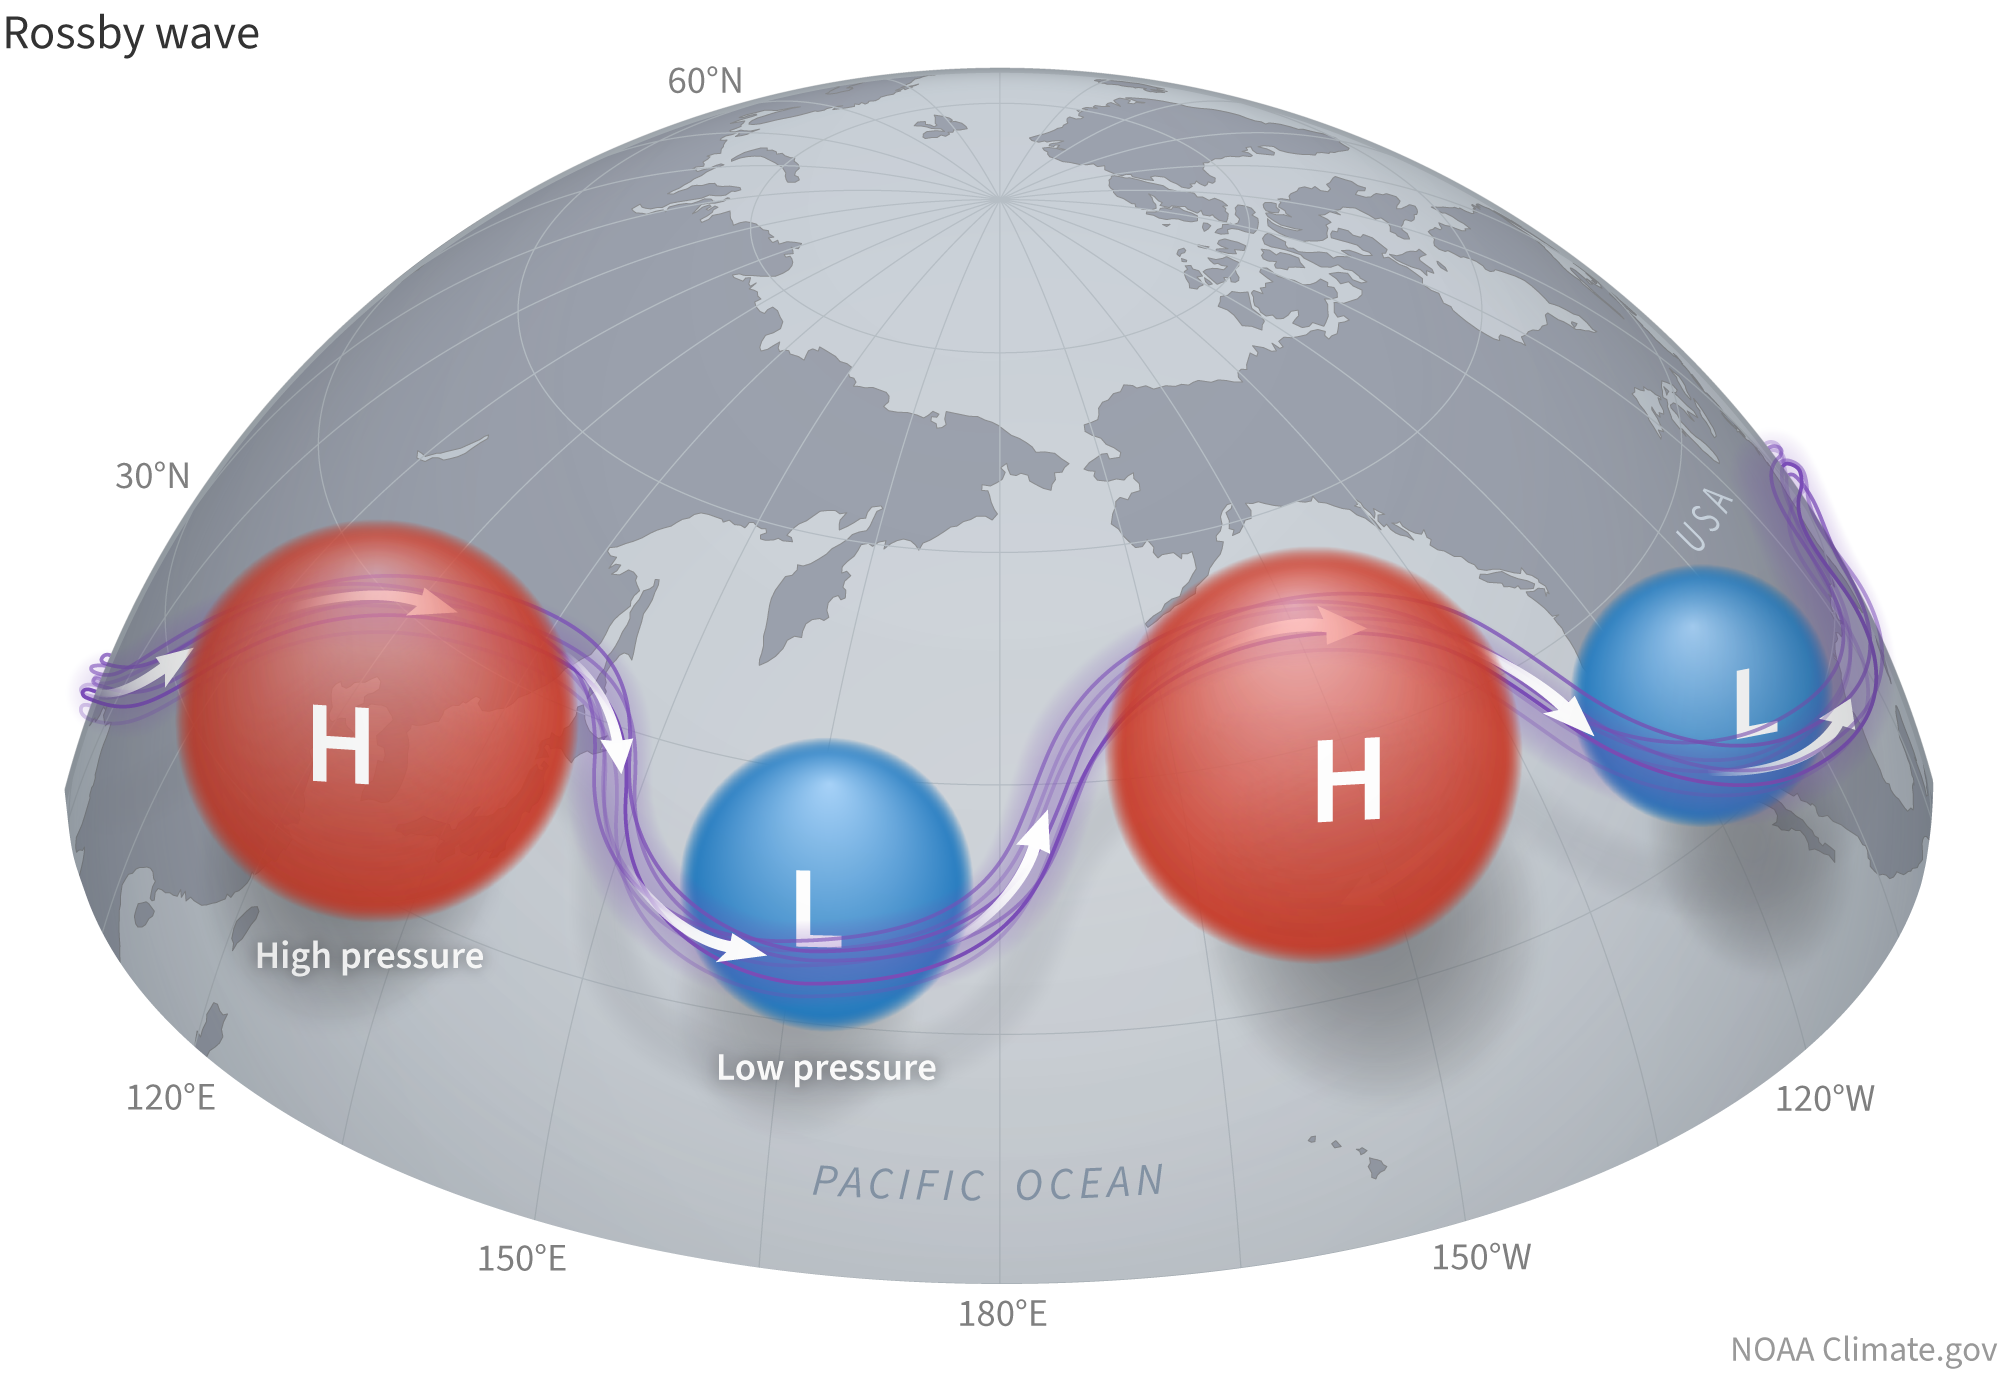 Diagram of high and low pressure zones embedded in the Northern Hemisphere jet stream by a Rossby wave